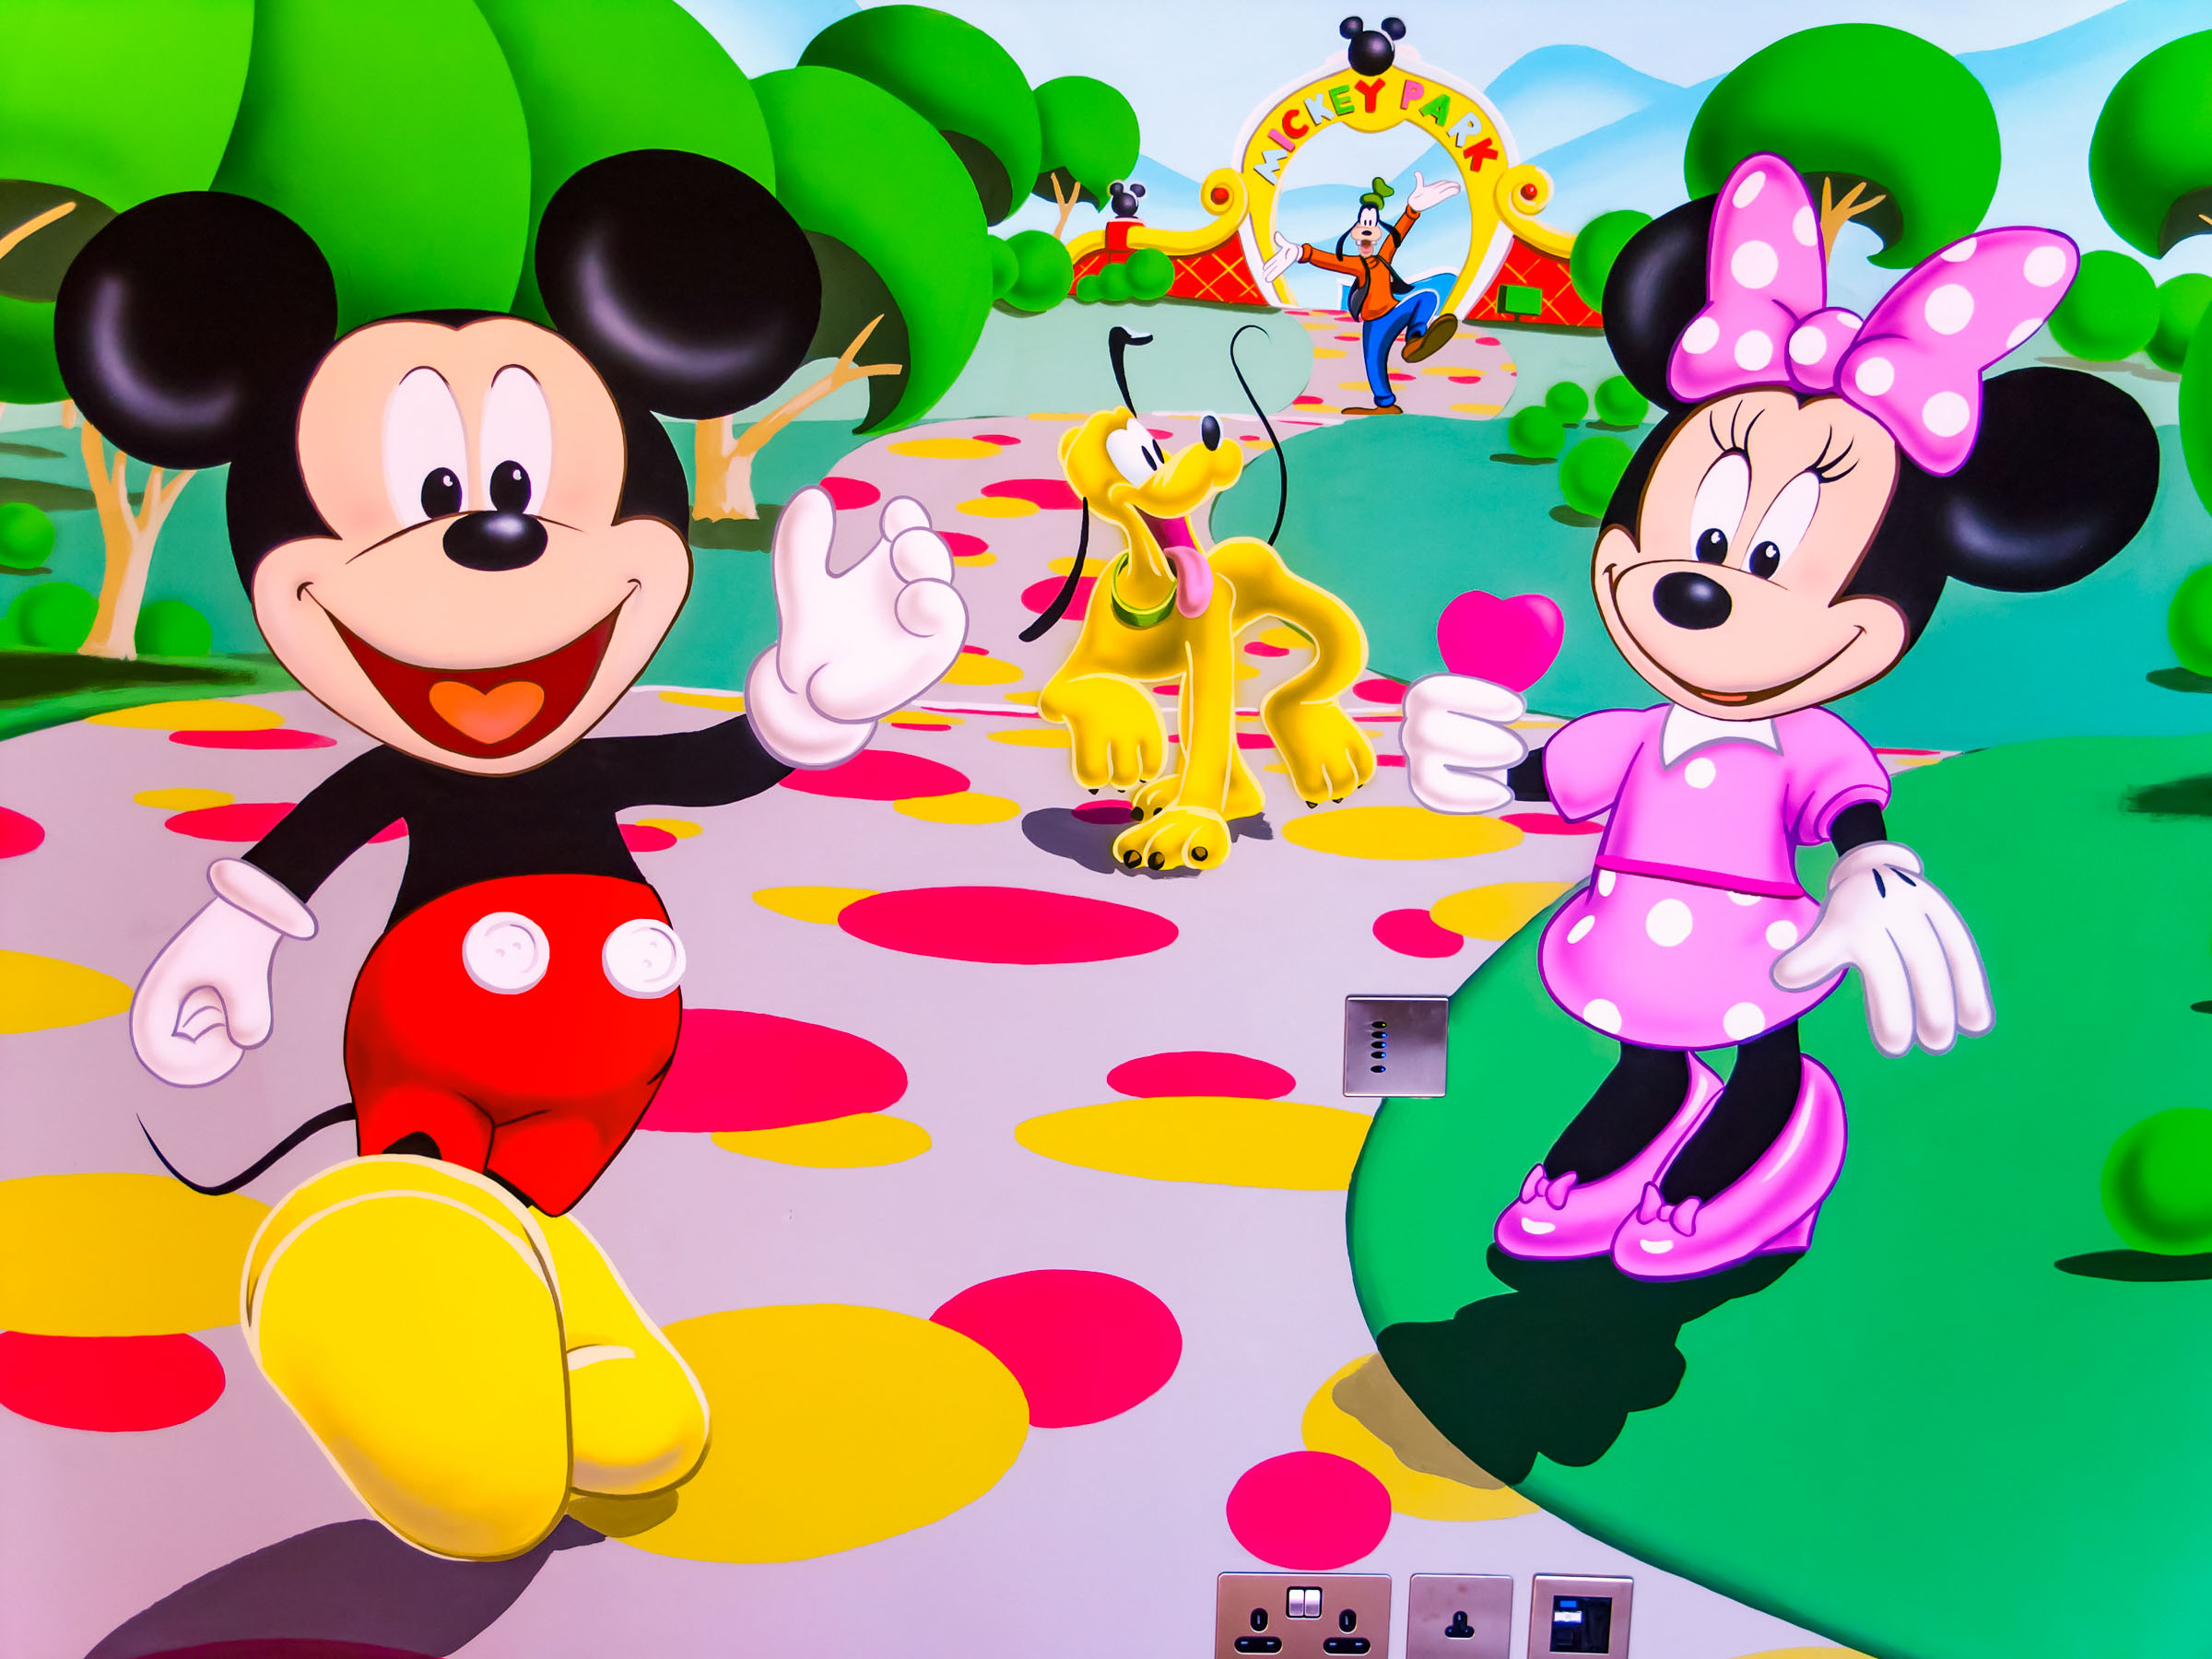 Mickey and Minnie Mouse, Pluto and Goofy in hand painted wall mural